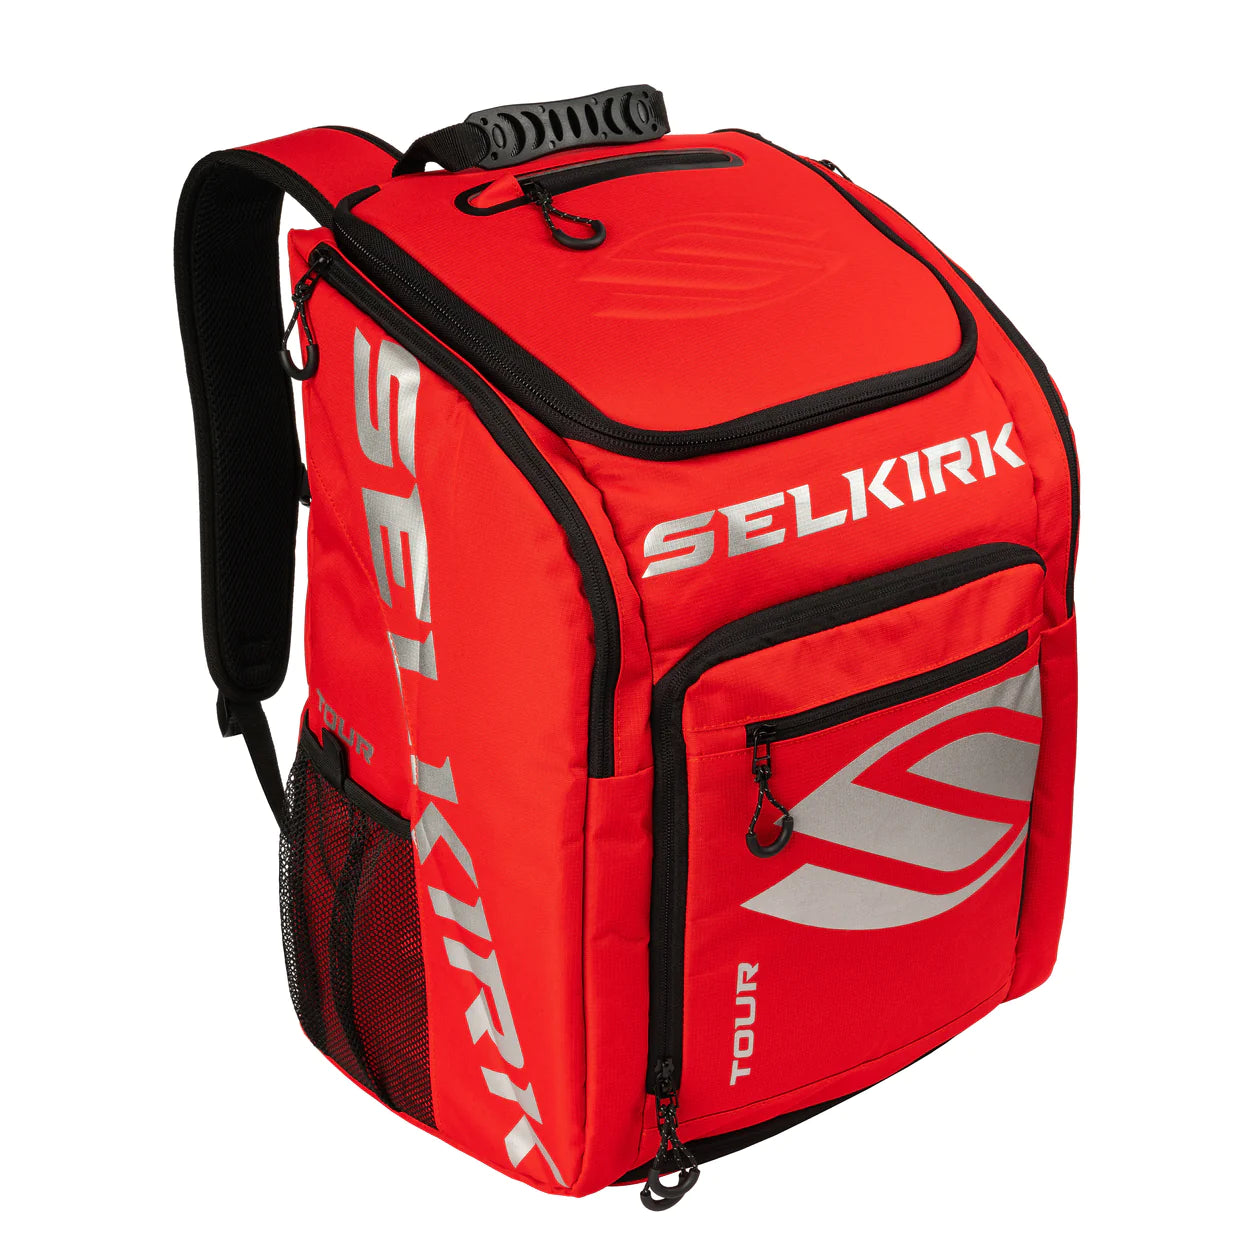 Selkirk Core Line Tour Backpack